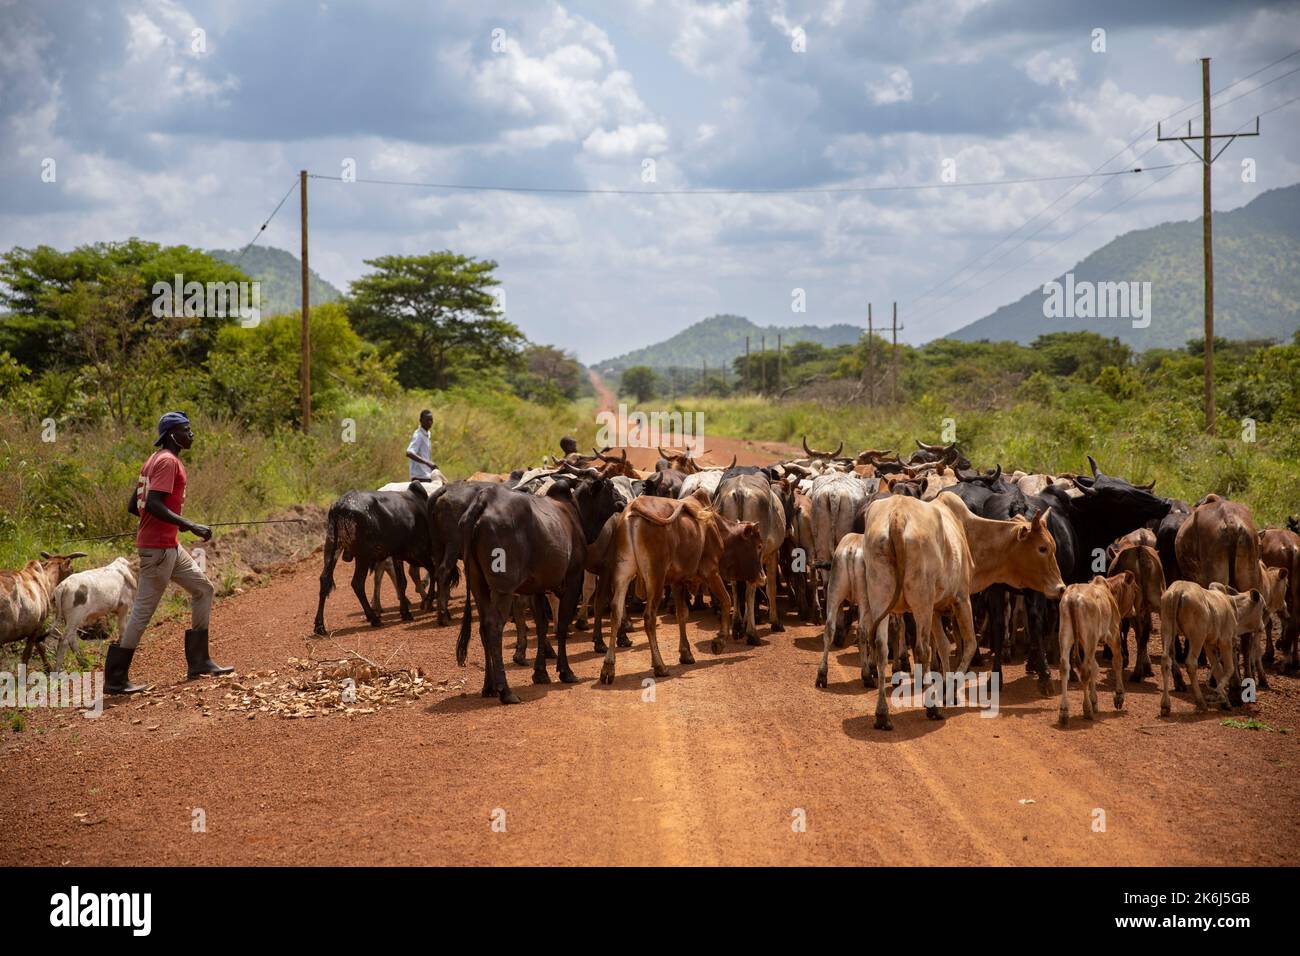 A herd of cattle move down a rural dirt road in Abim District, Uganda, East Africa. Stock Photo